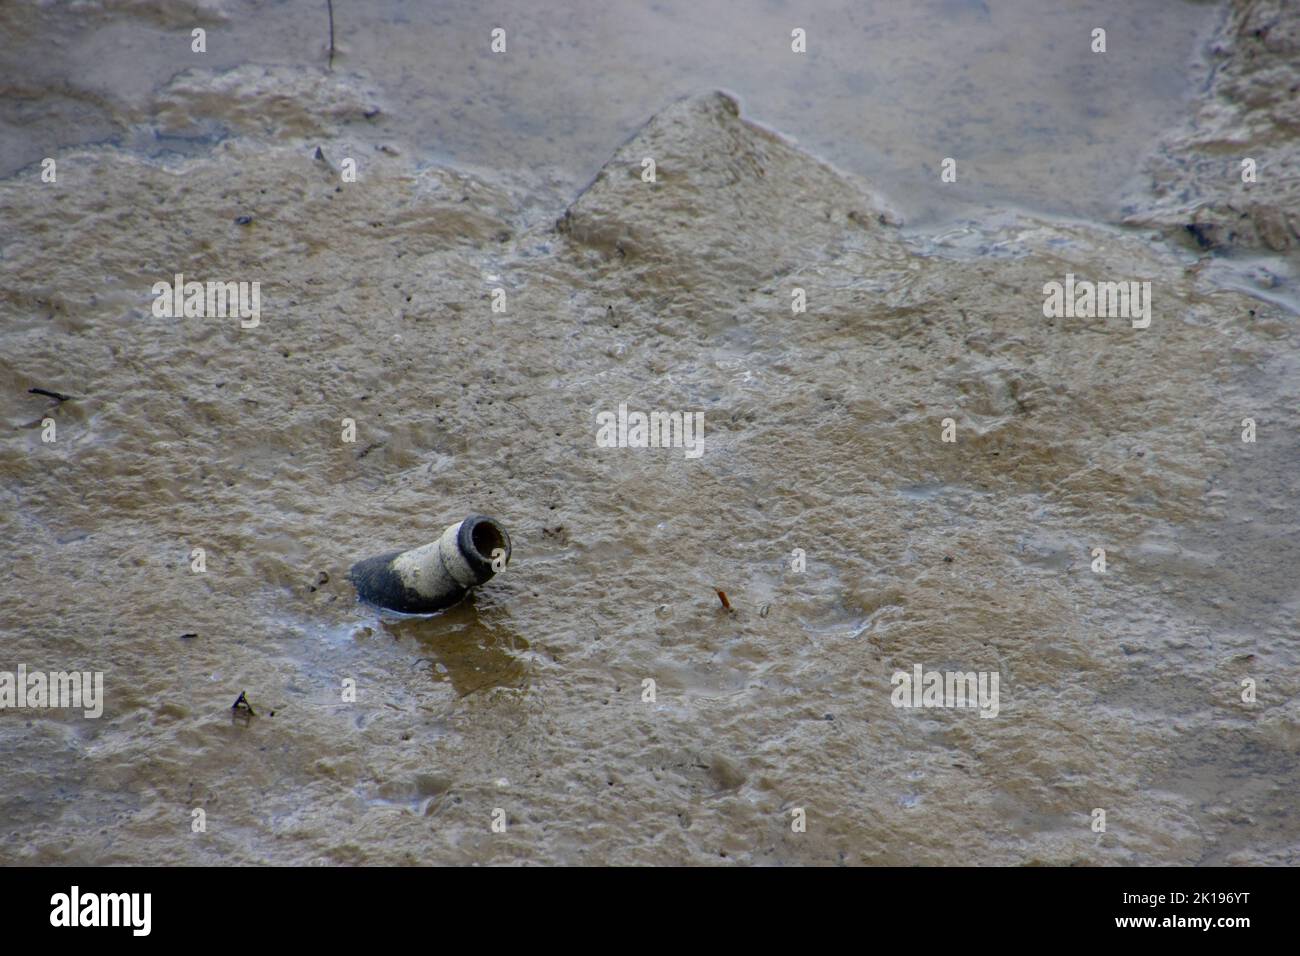 Beer bottle in the mud during low tide, concept of environmental pollution Stock Photo